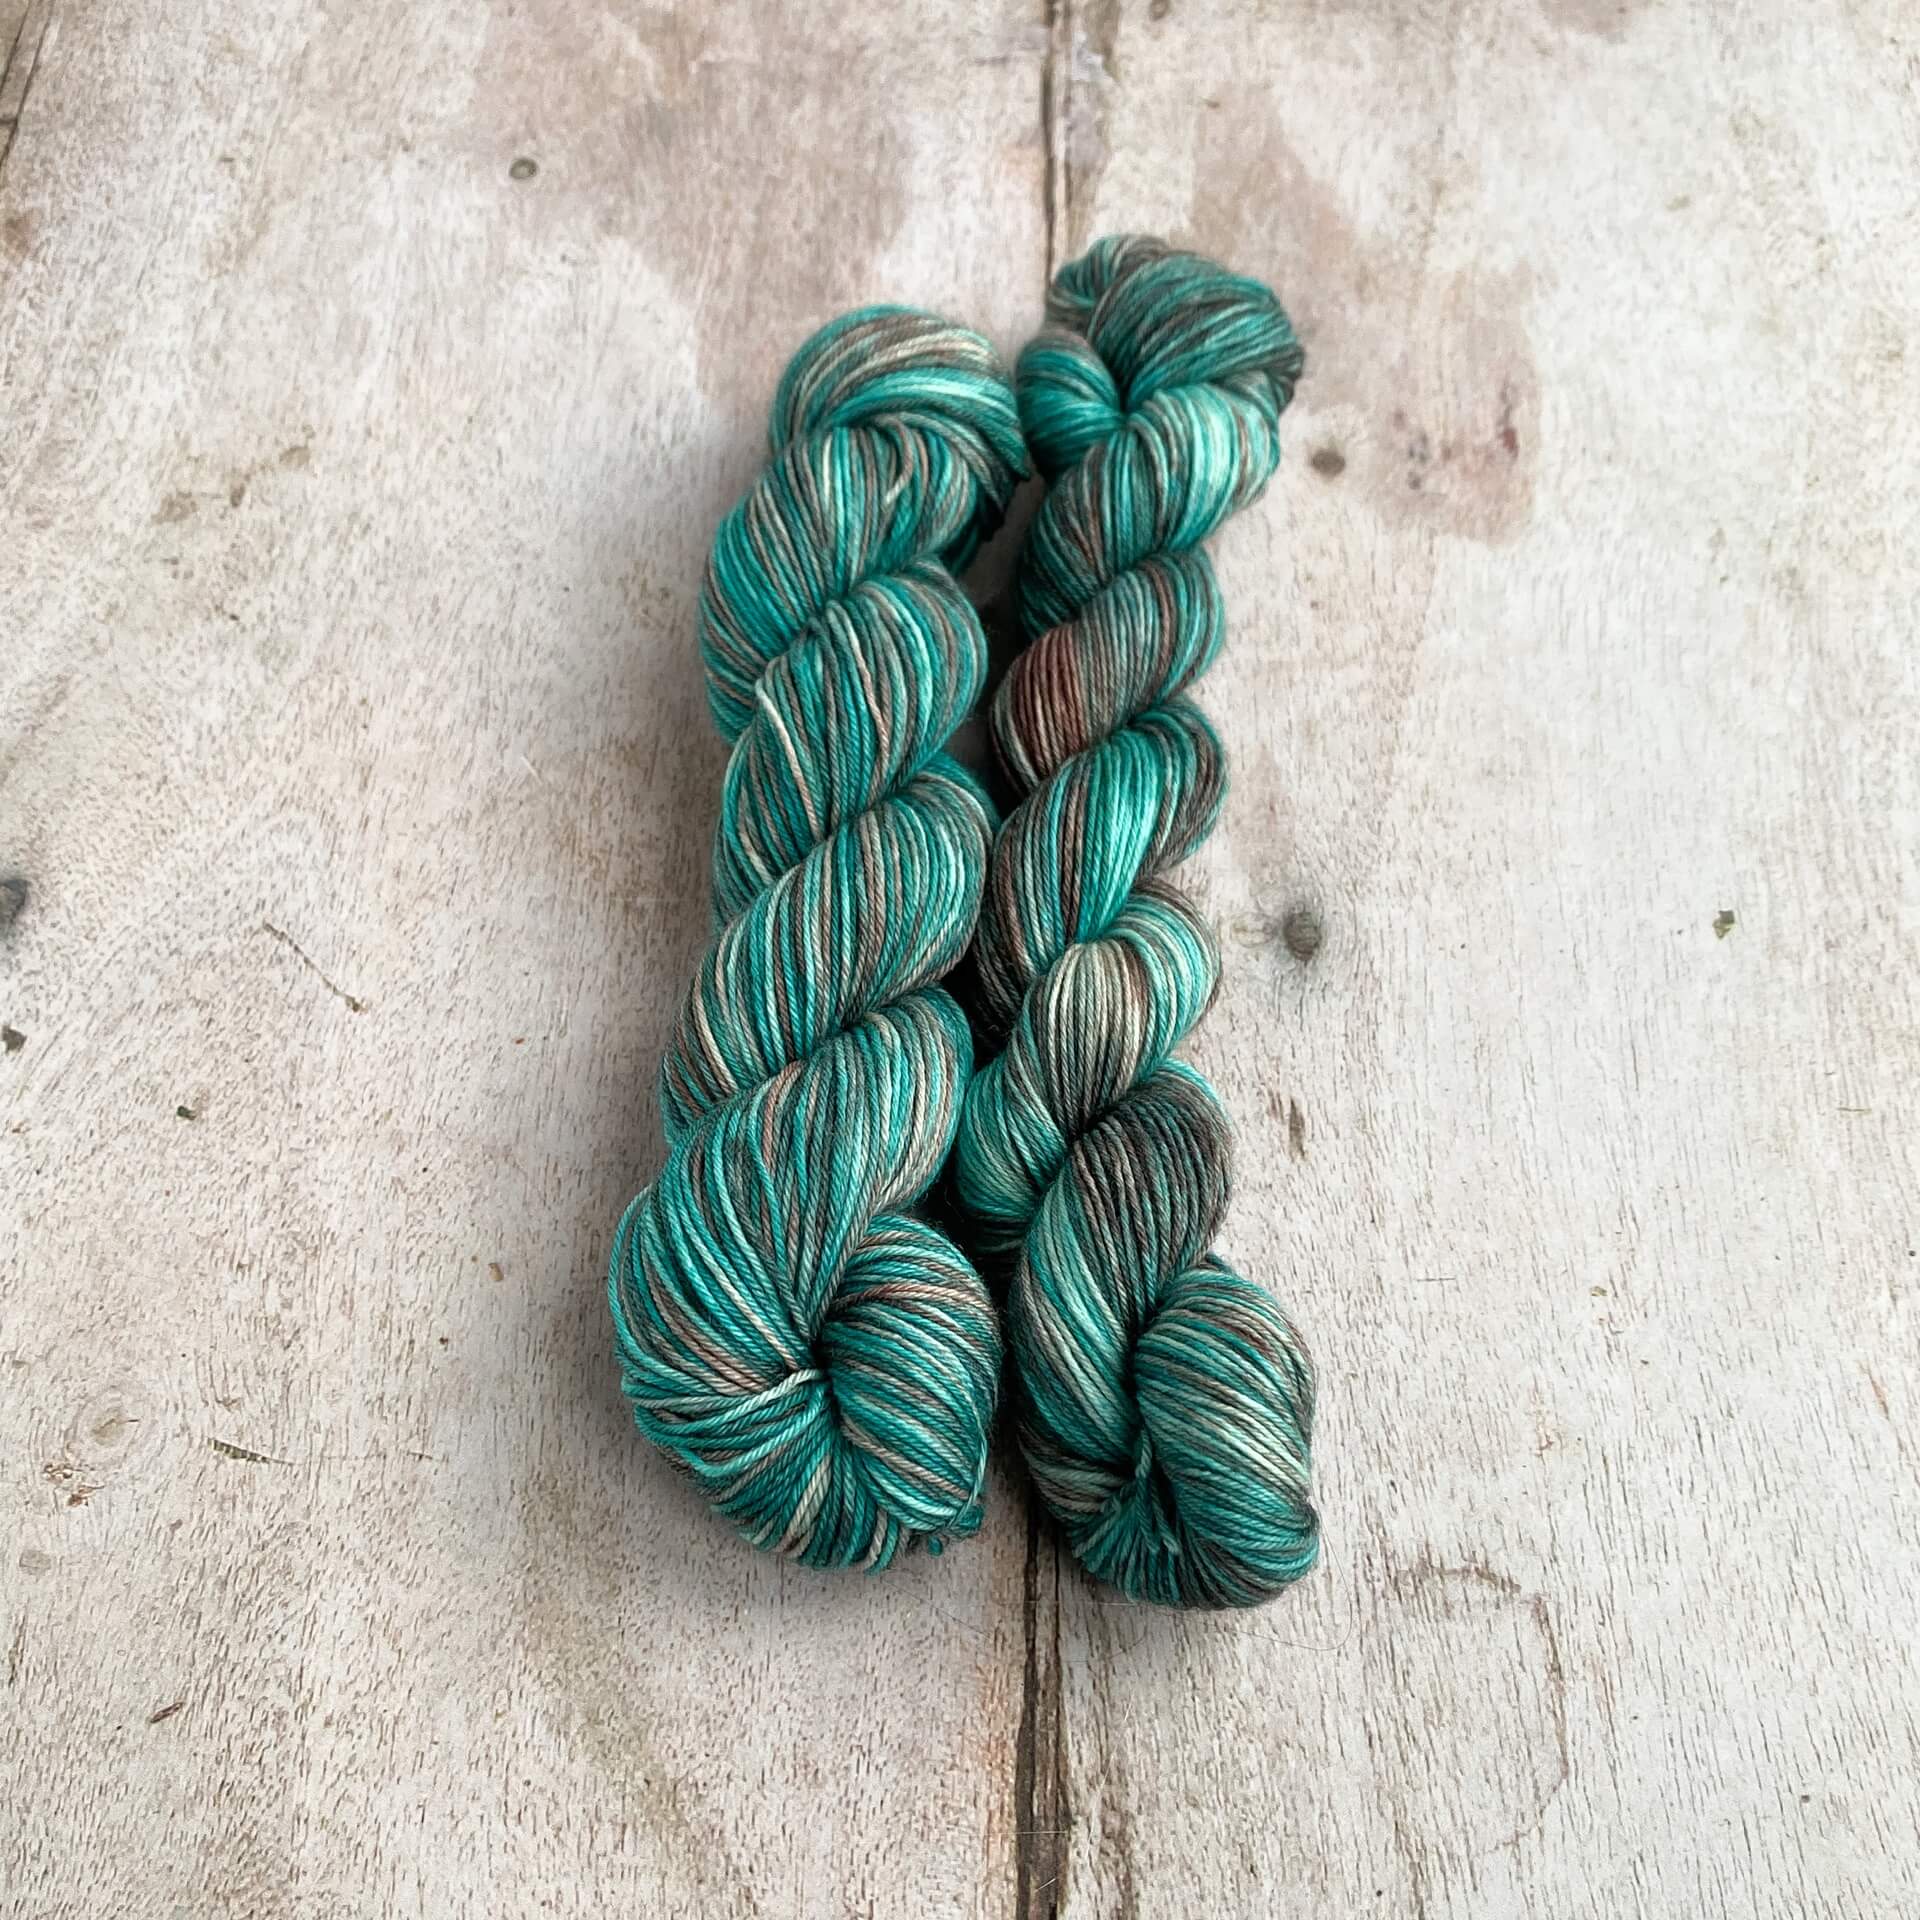 Two skeins of yarns dyed with teals and browns sit togther on a wooden table. 